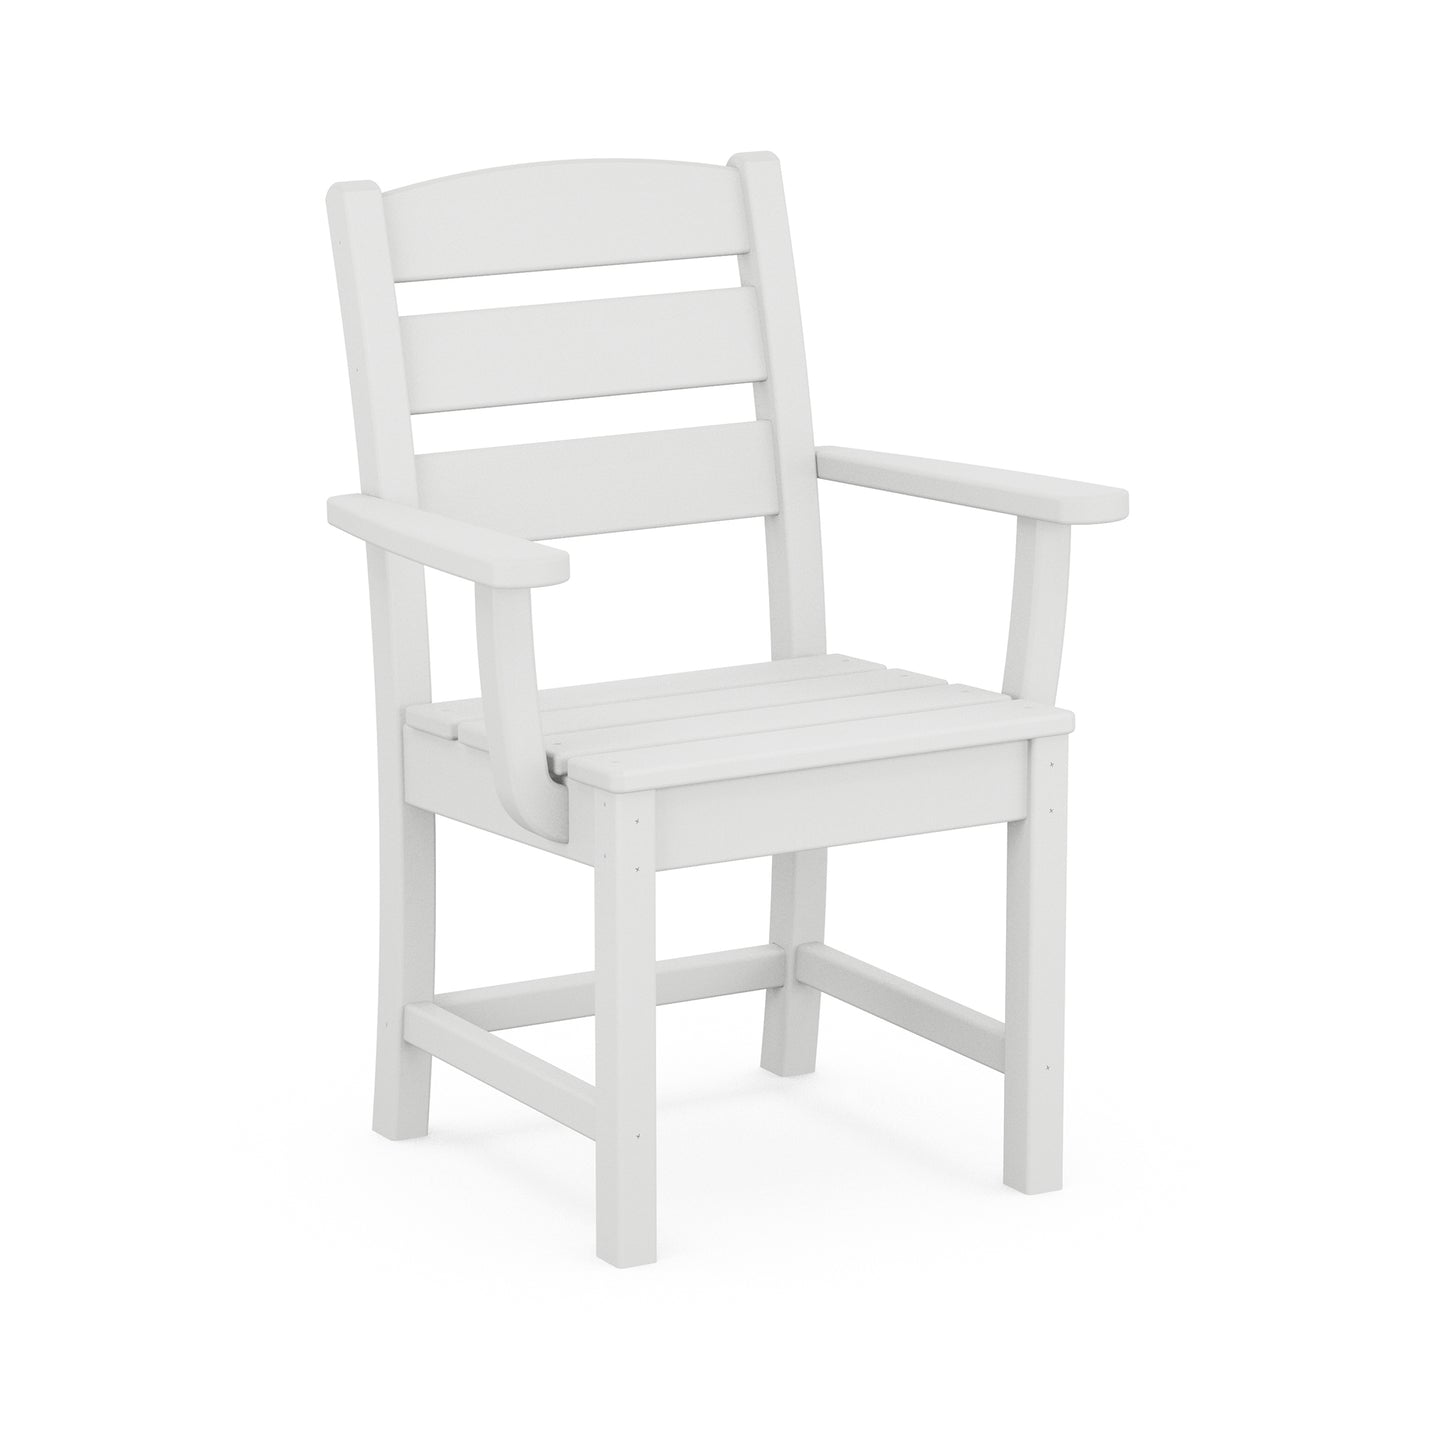 A white wooden dining chair on a white background.